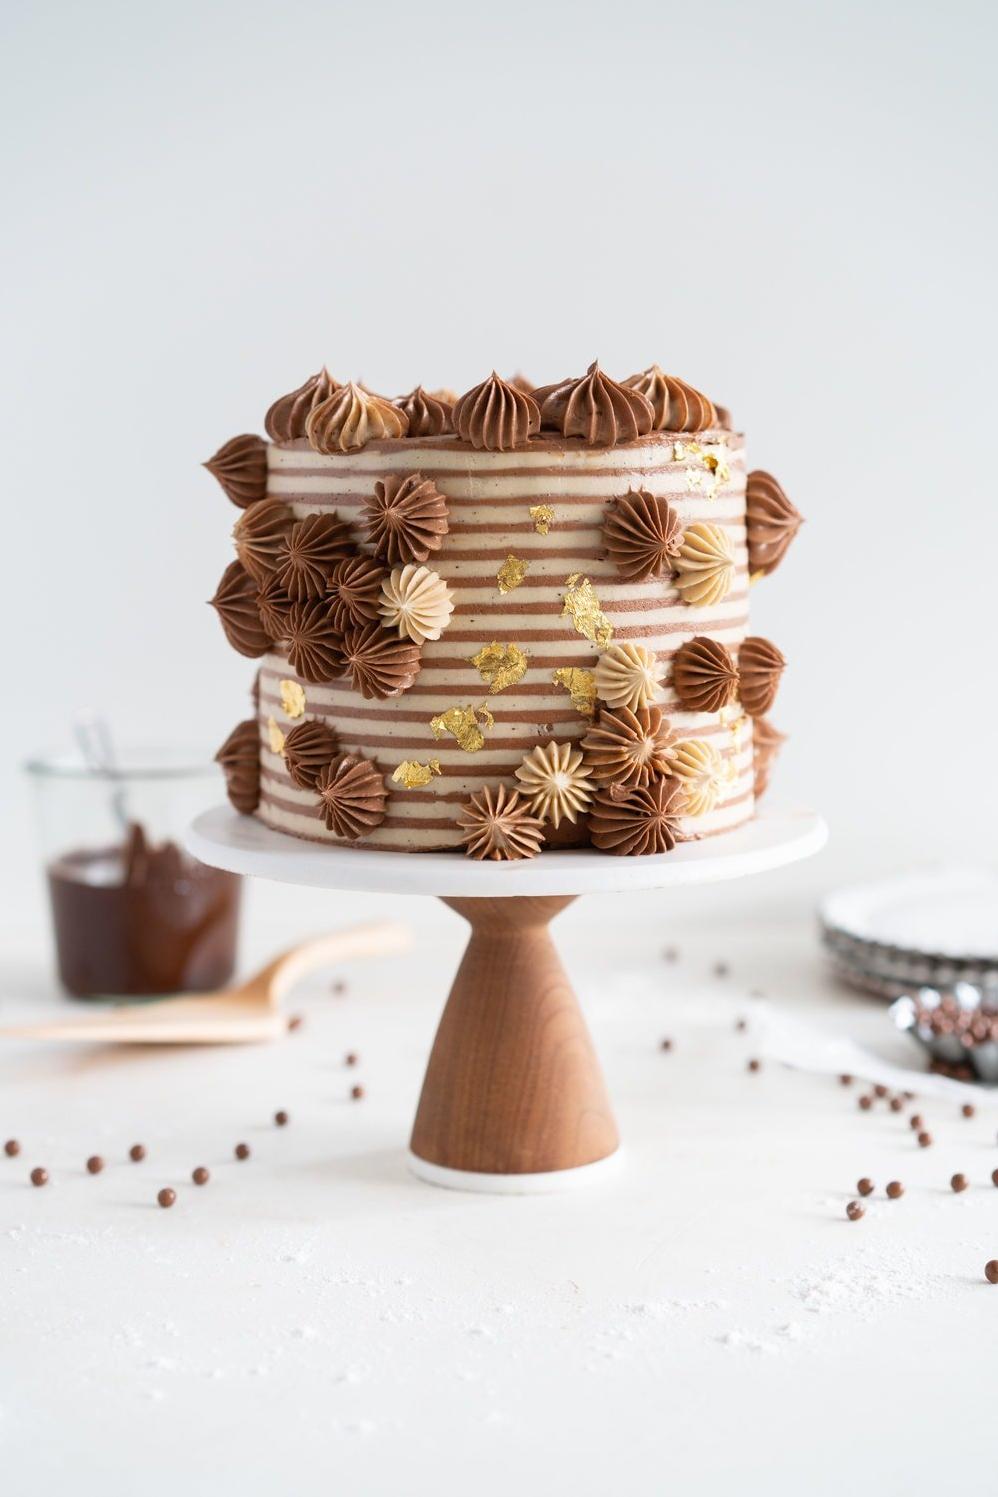  The perfect dessert for coffee lovers, this mocha brownie cake is a real treat.